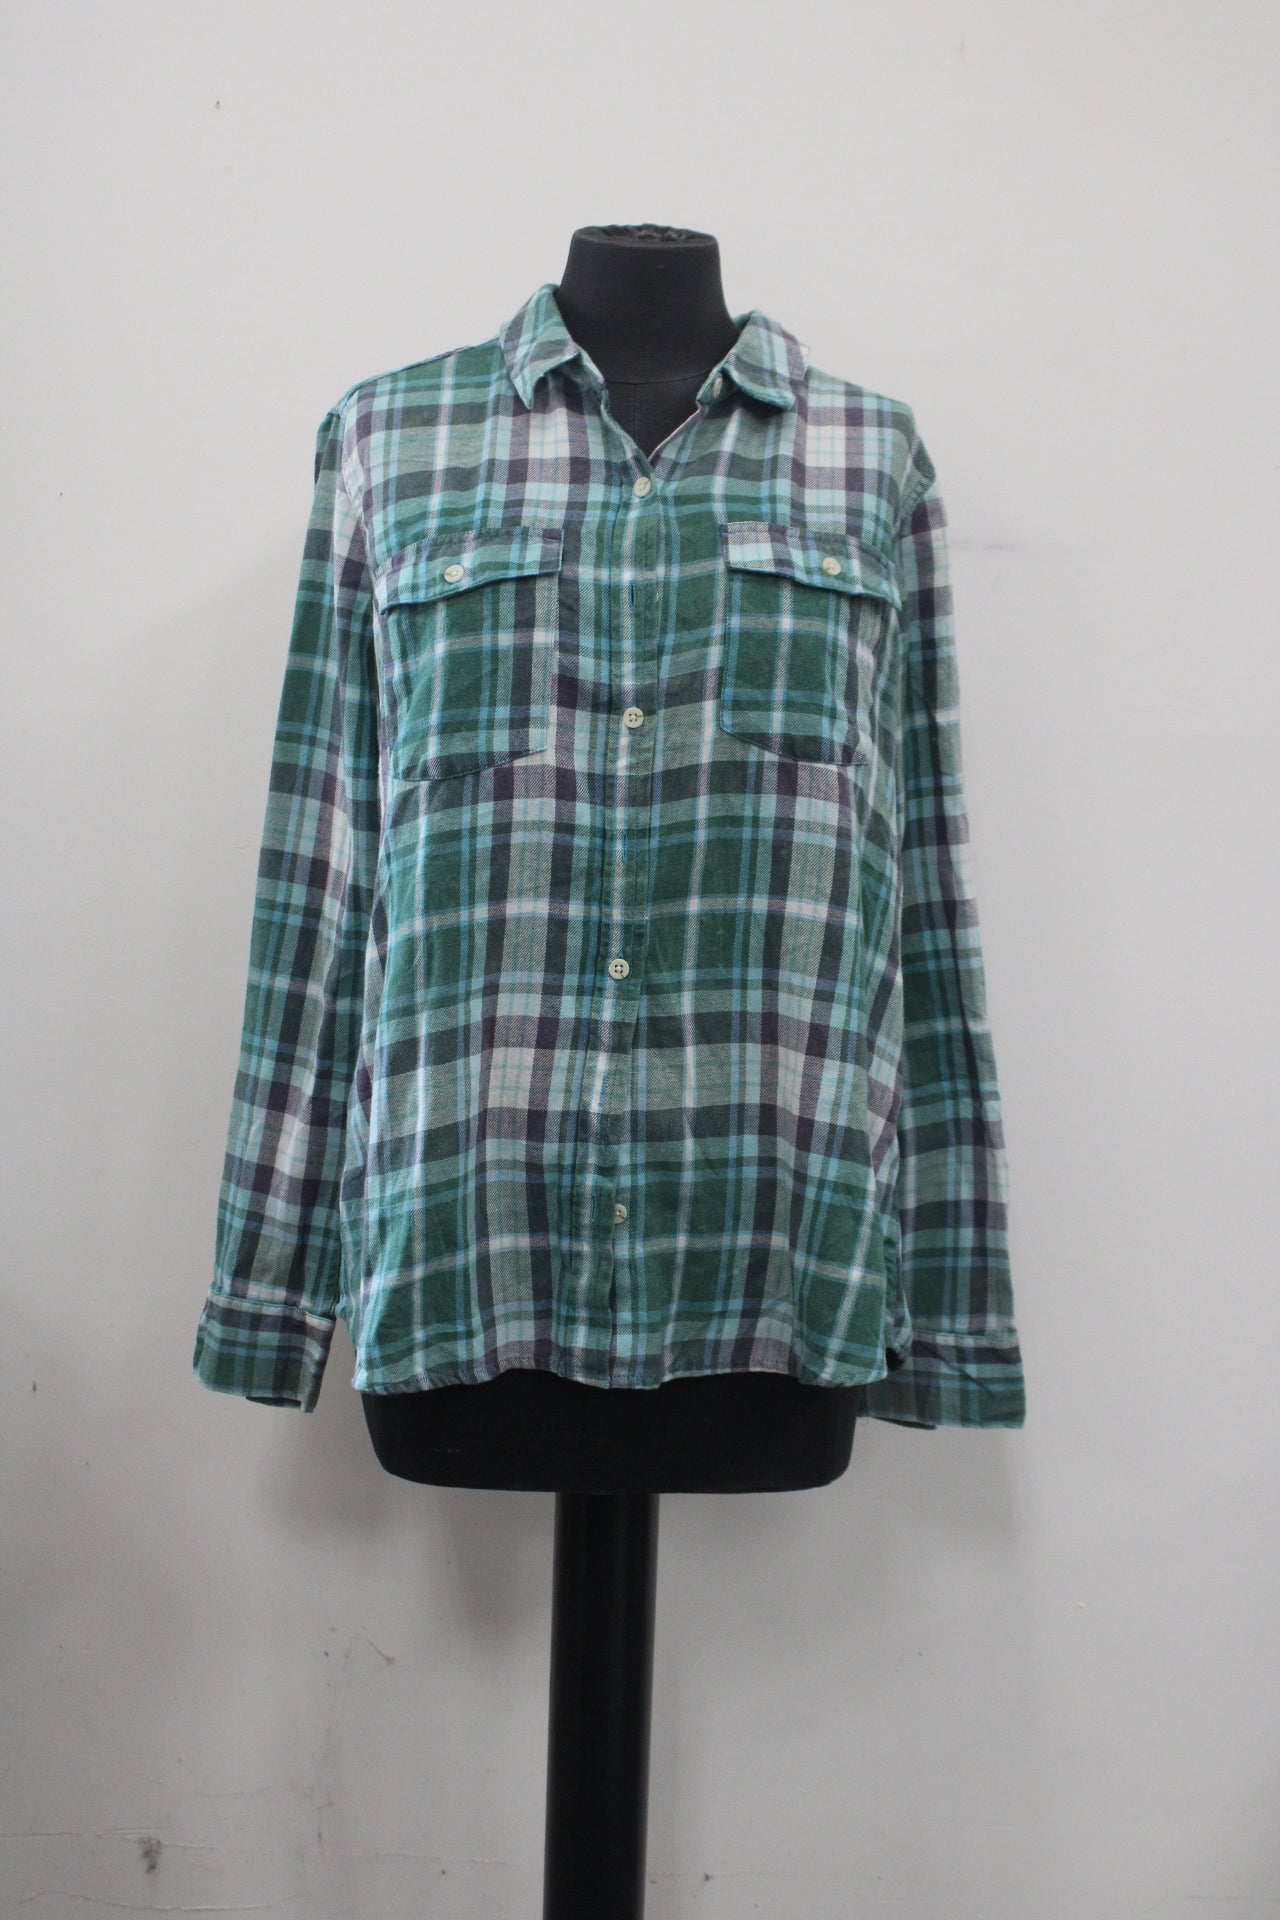 Mossimo Clothing green and black flannel. Oversized